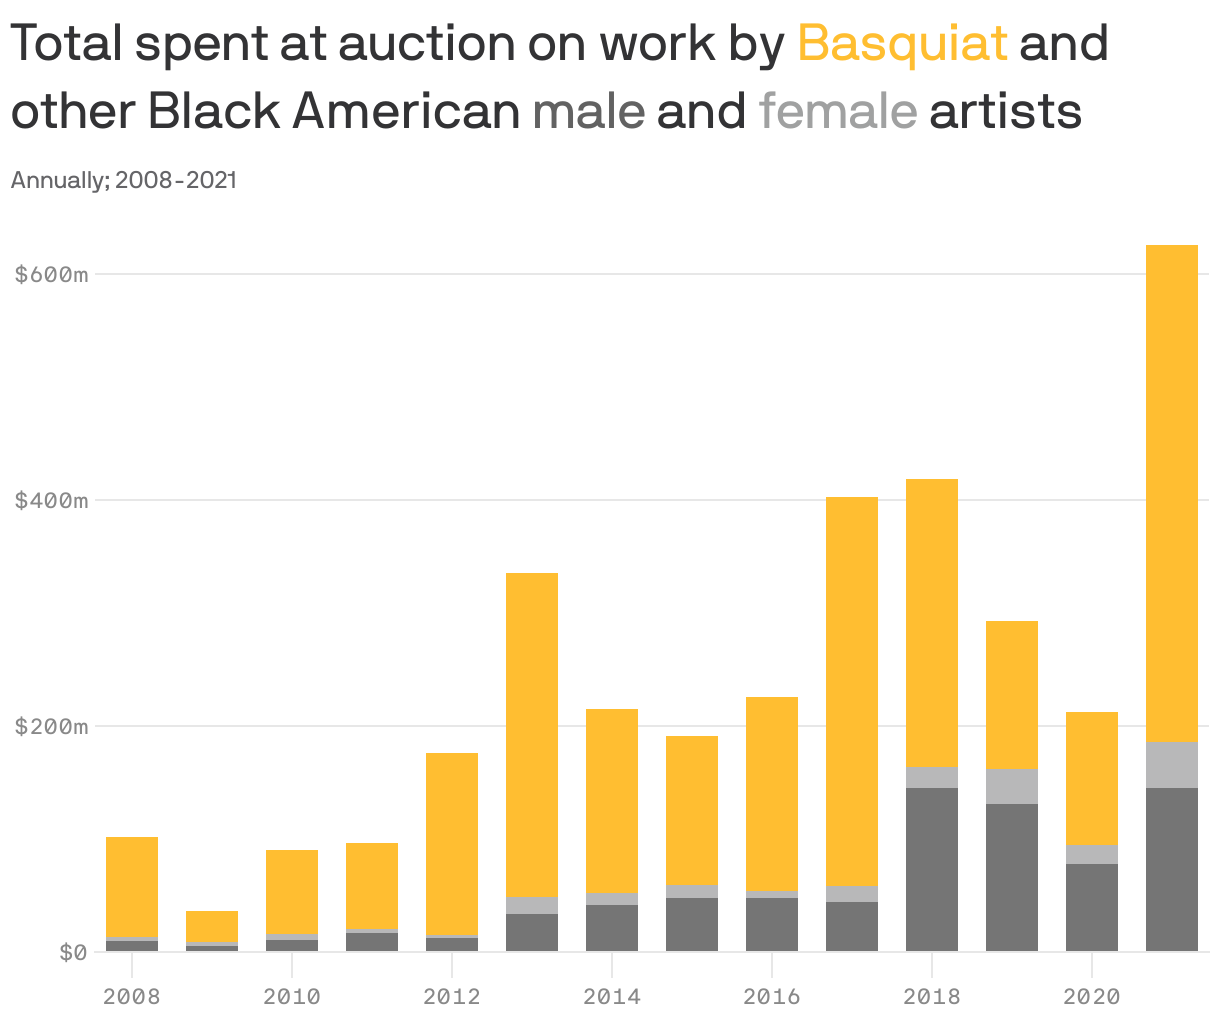 Total spent at auction on work by <span style="color:#ffbe31;"> Basquiat</span> and other Black American  <span style="color:#626262;">male</span> and <span style="color:#a0a1a1;">female</span> artists
 